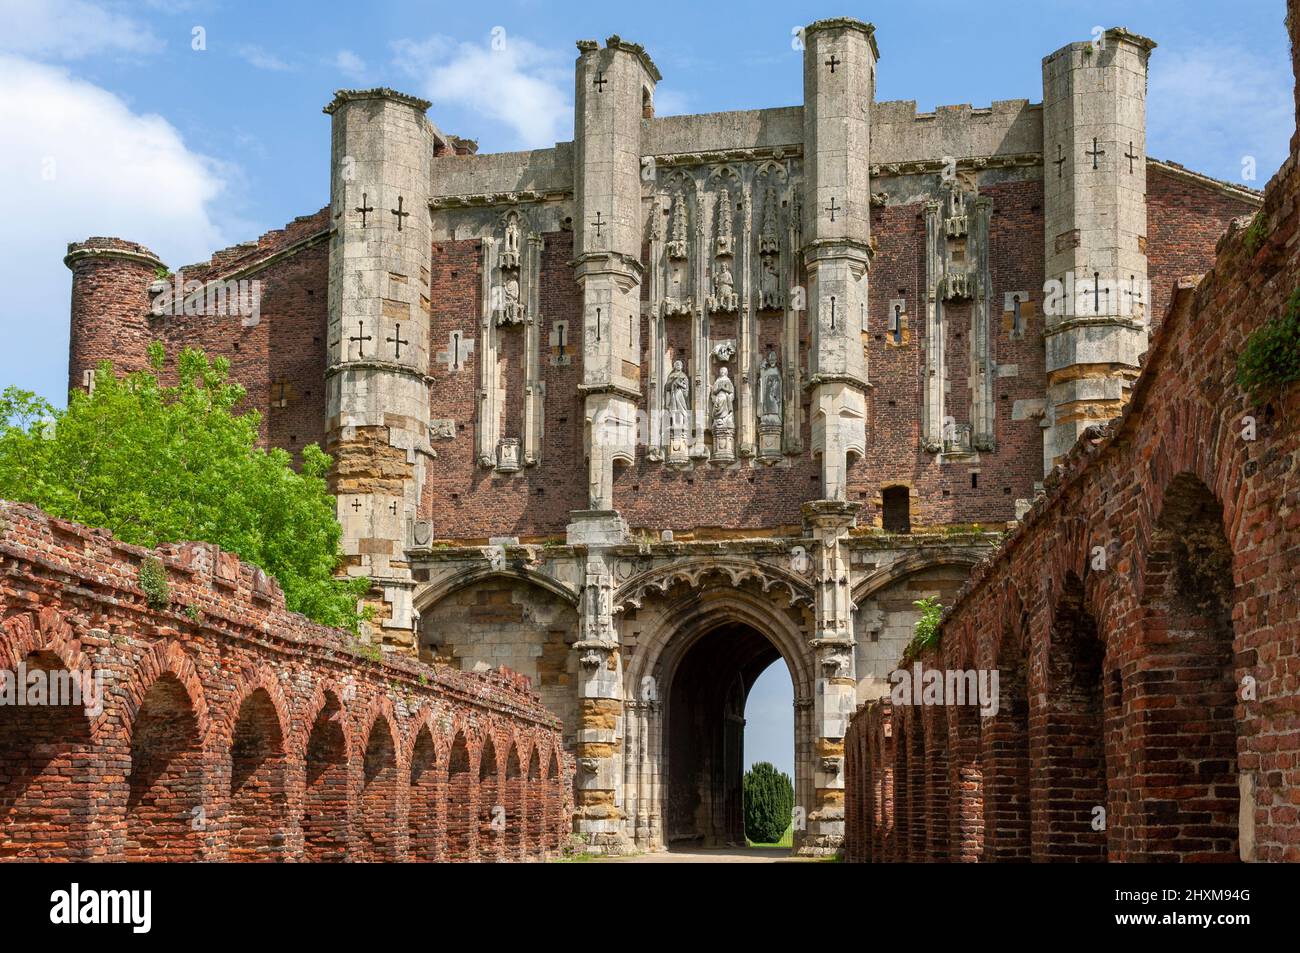 Thornton Abbey - gatehouse - Thornton Curtis, North Lincolnshire, Lincolnshire, England, UK - an English Heritage property with grade I listing. Stock Photo